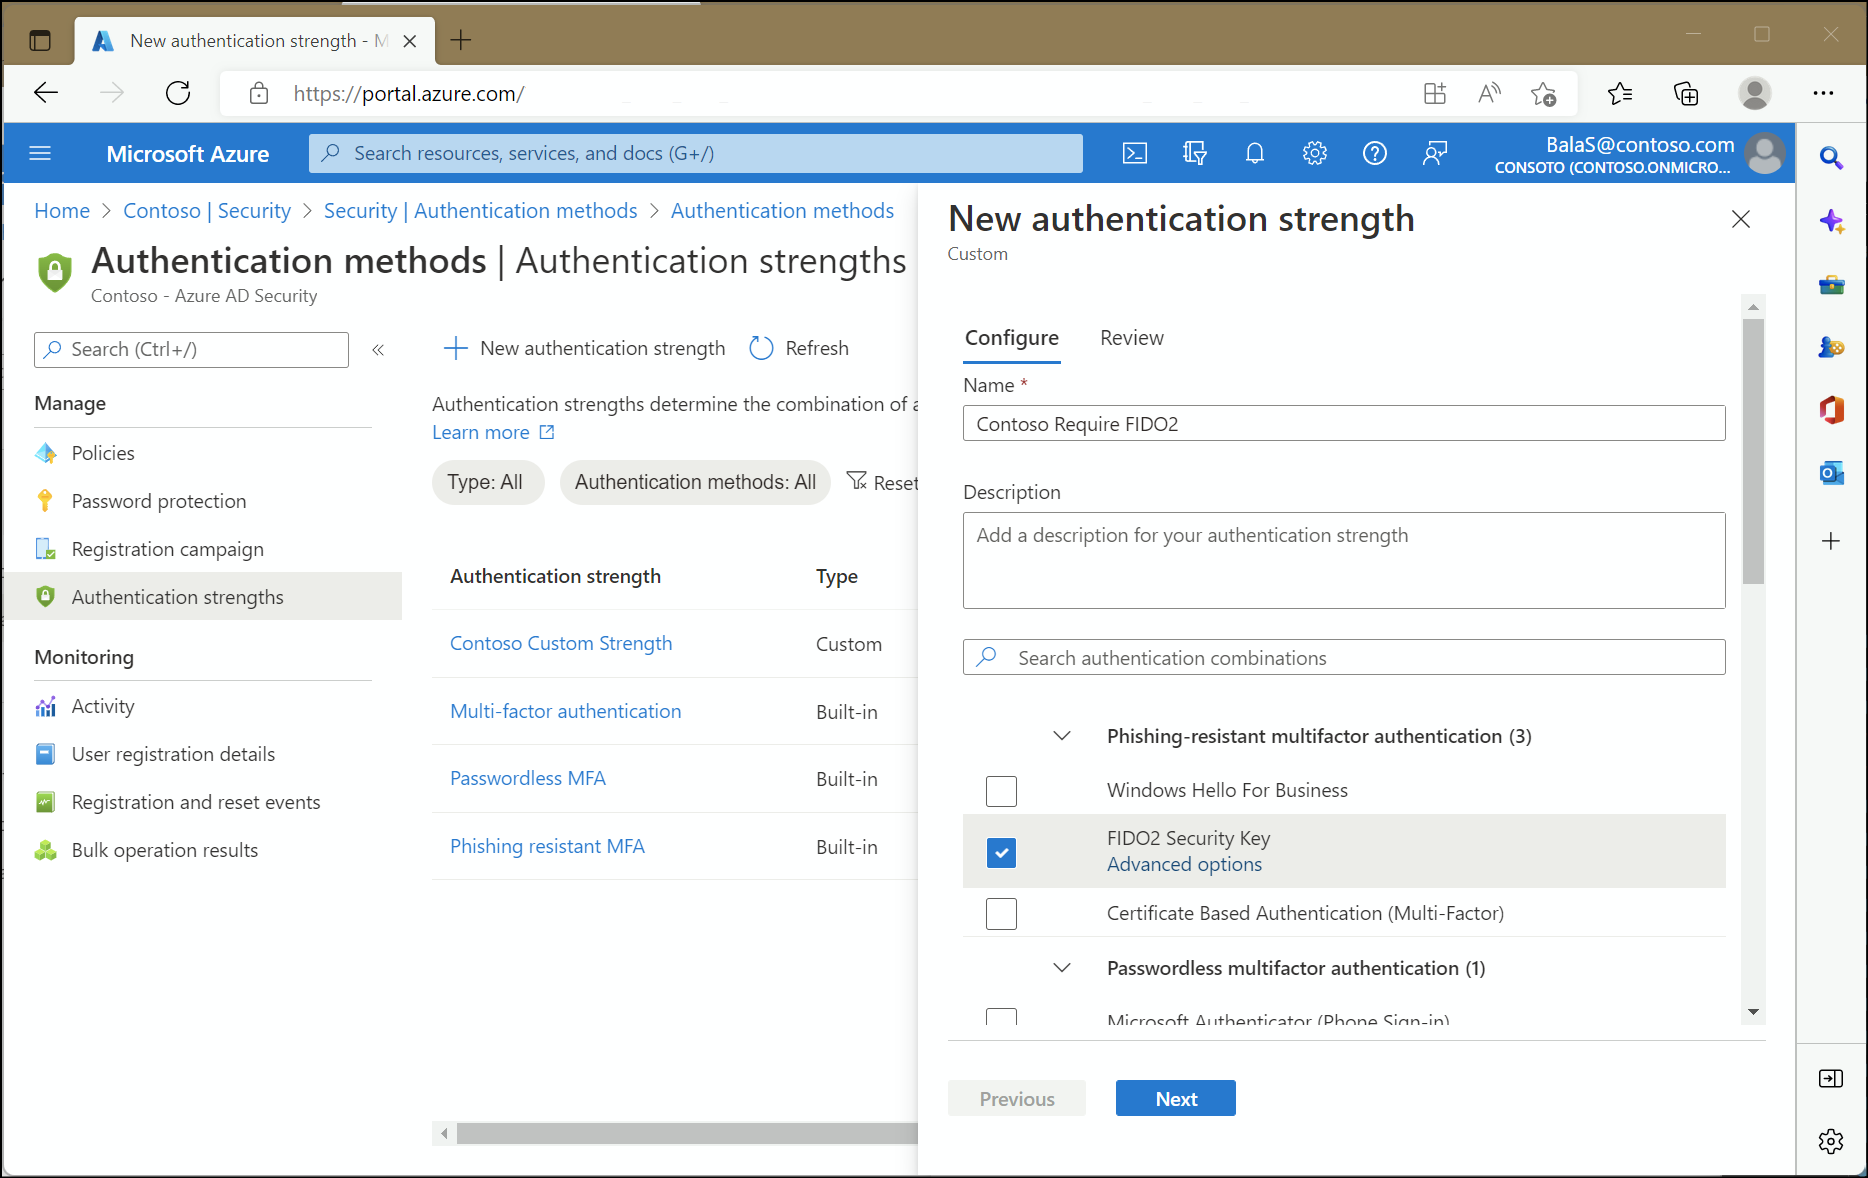 Screenshot showing the creation of a custom authentication strength.